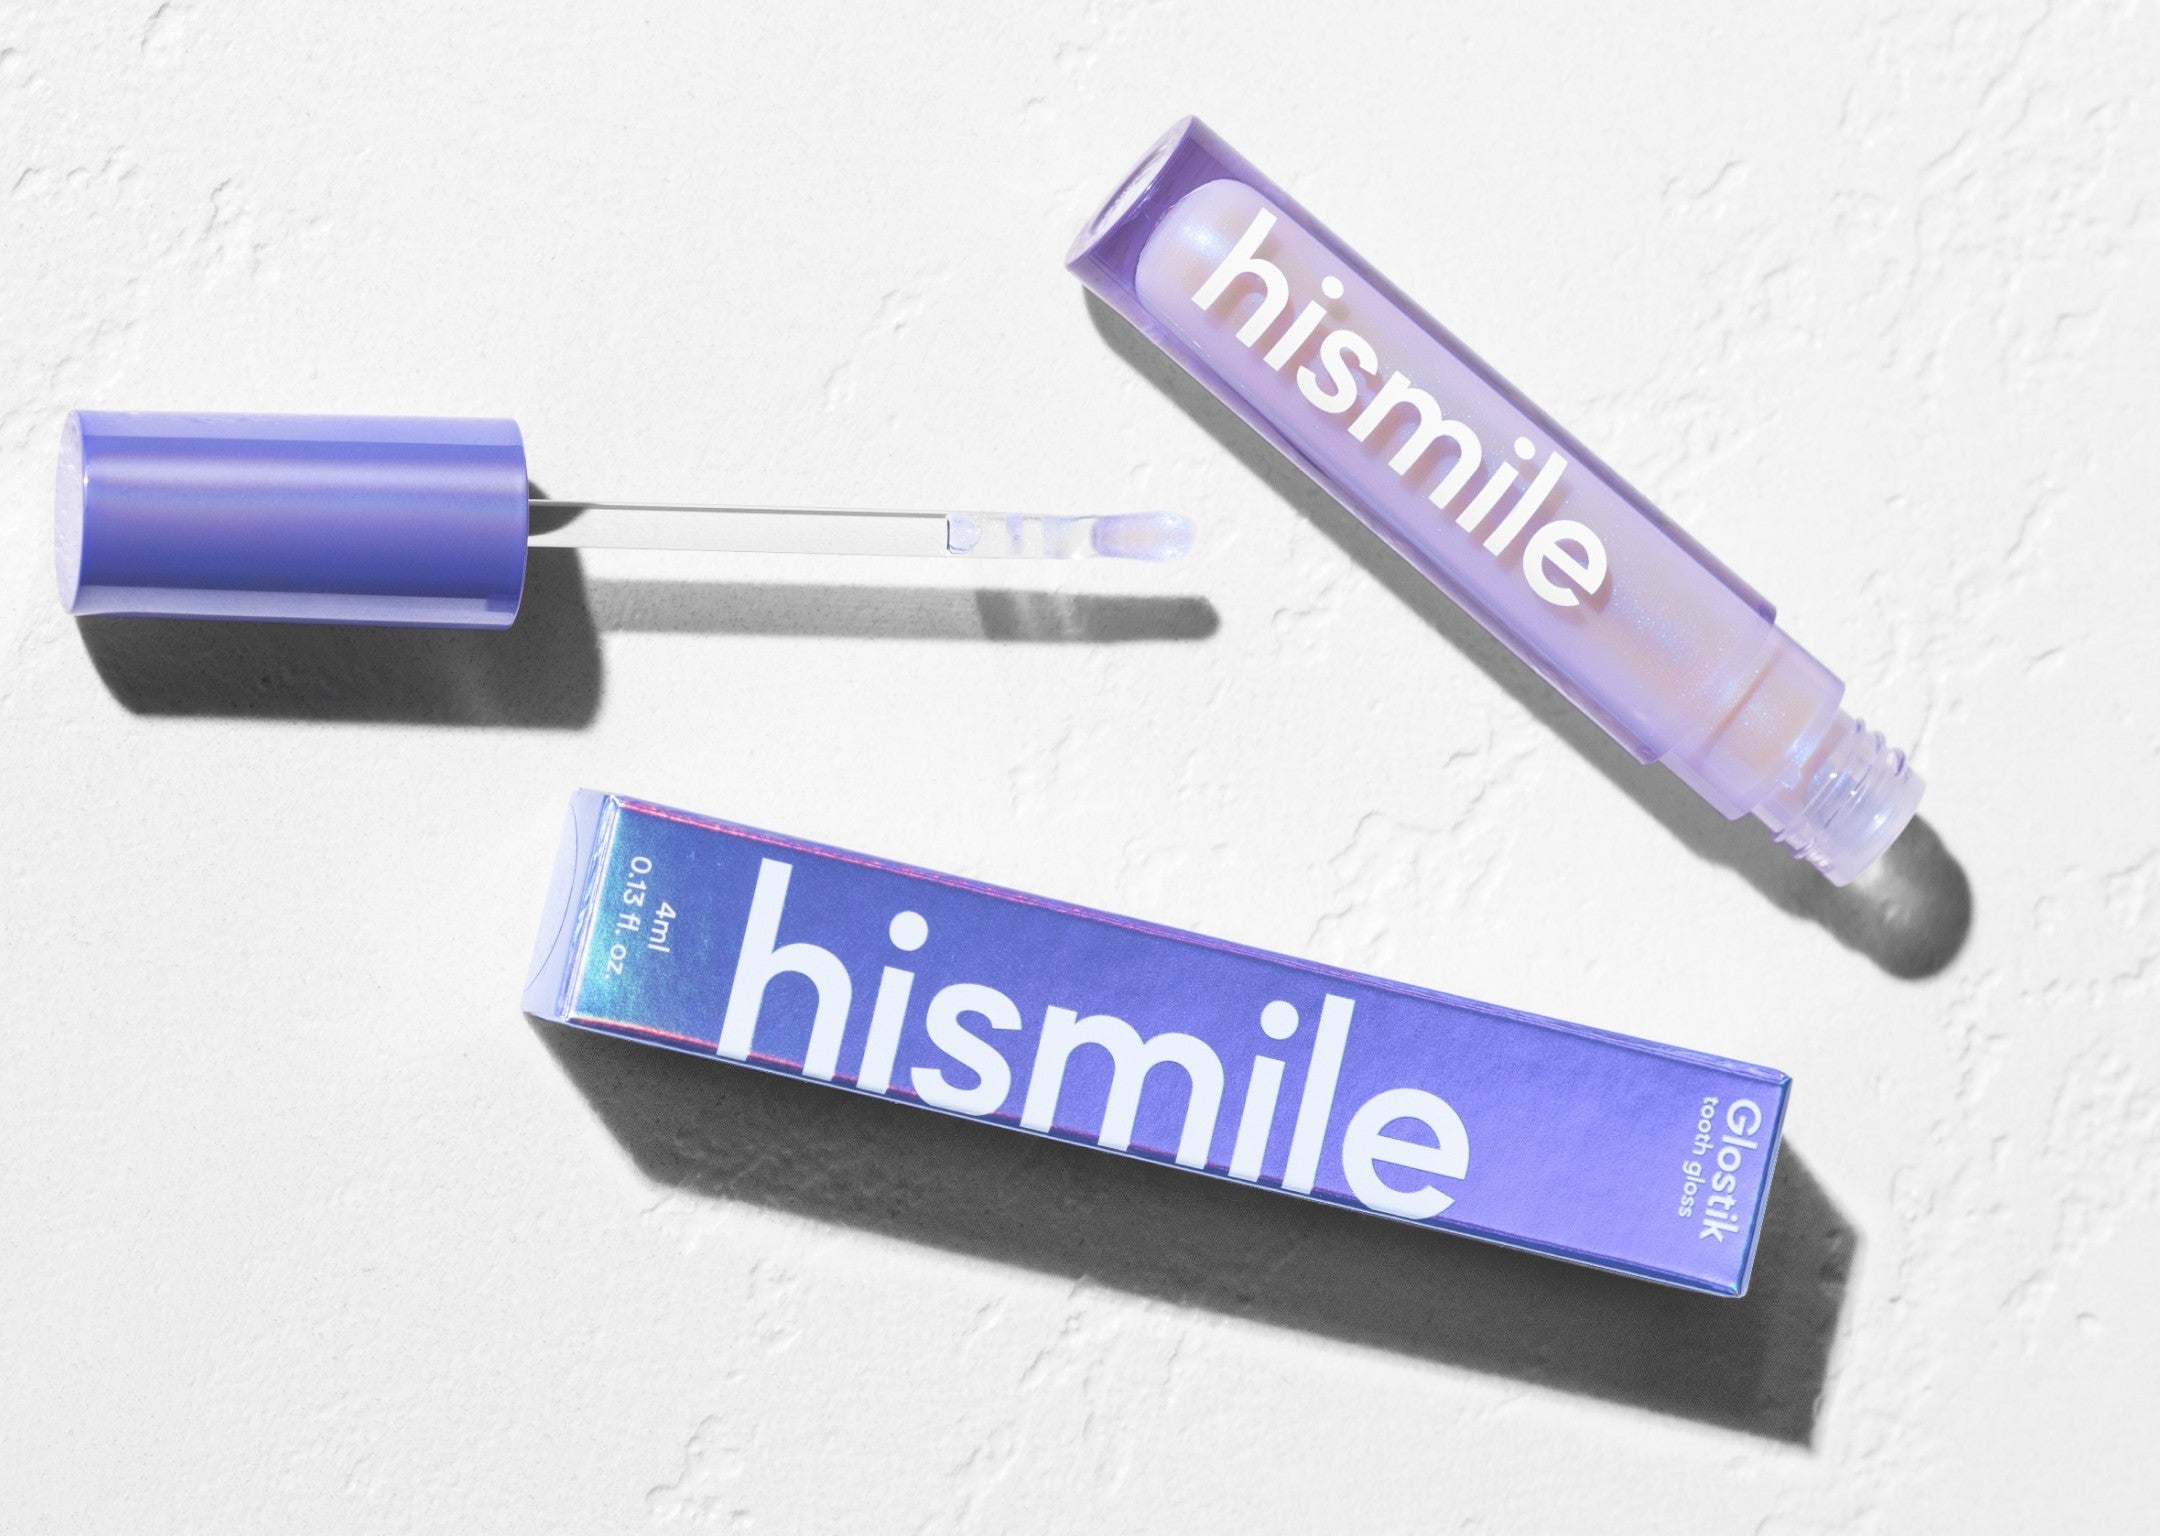 Hismile - Say hi to Hi by Hismile!👋 Treat your teeth to 5 mouth